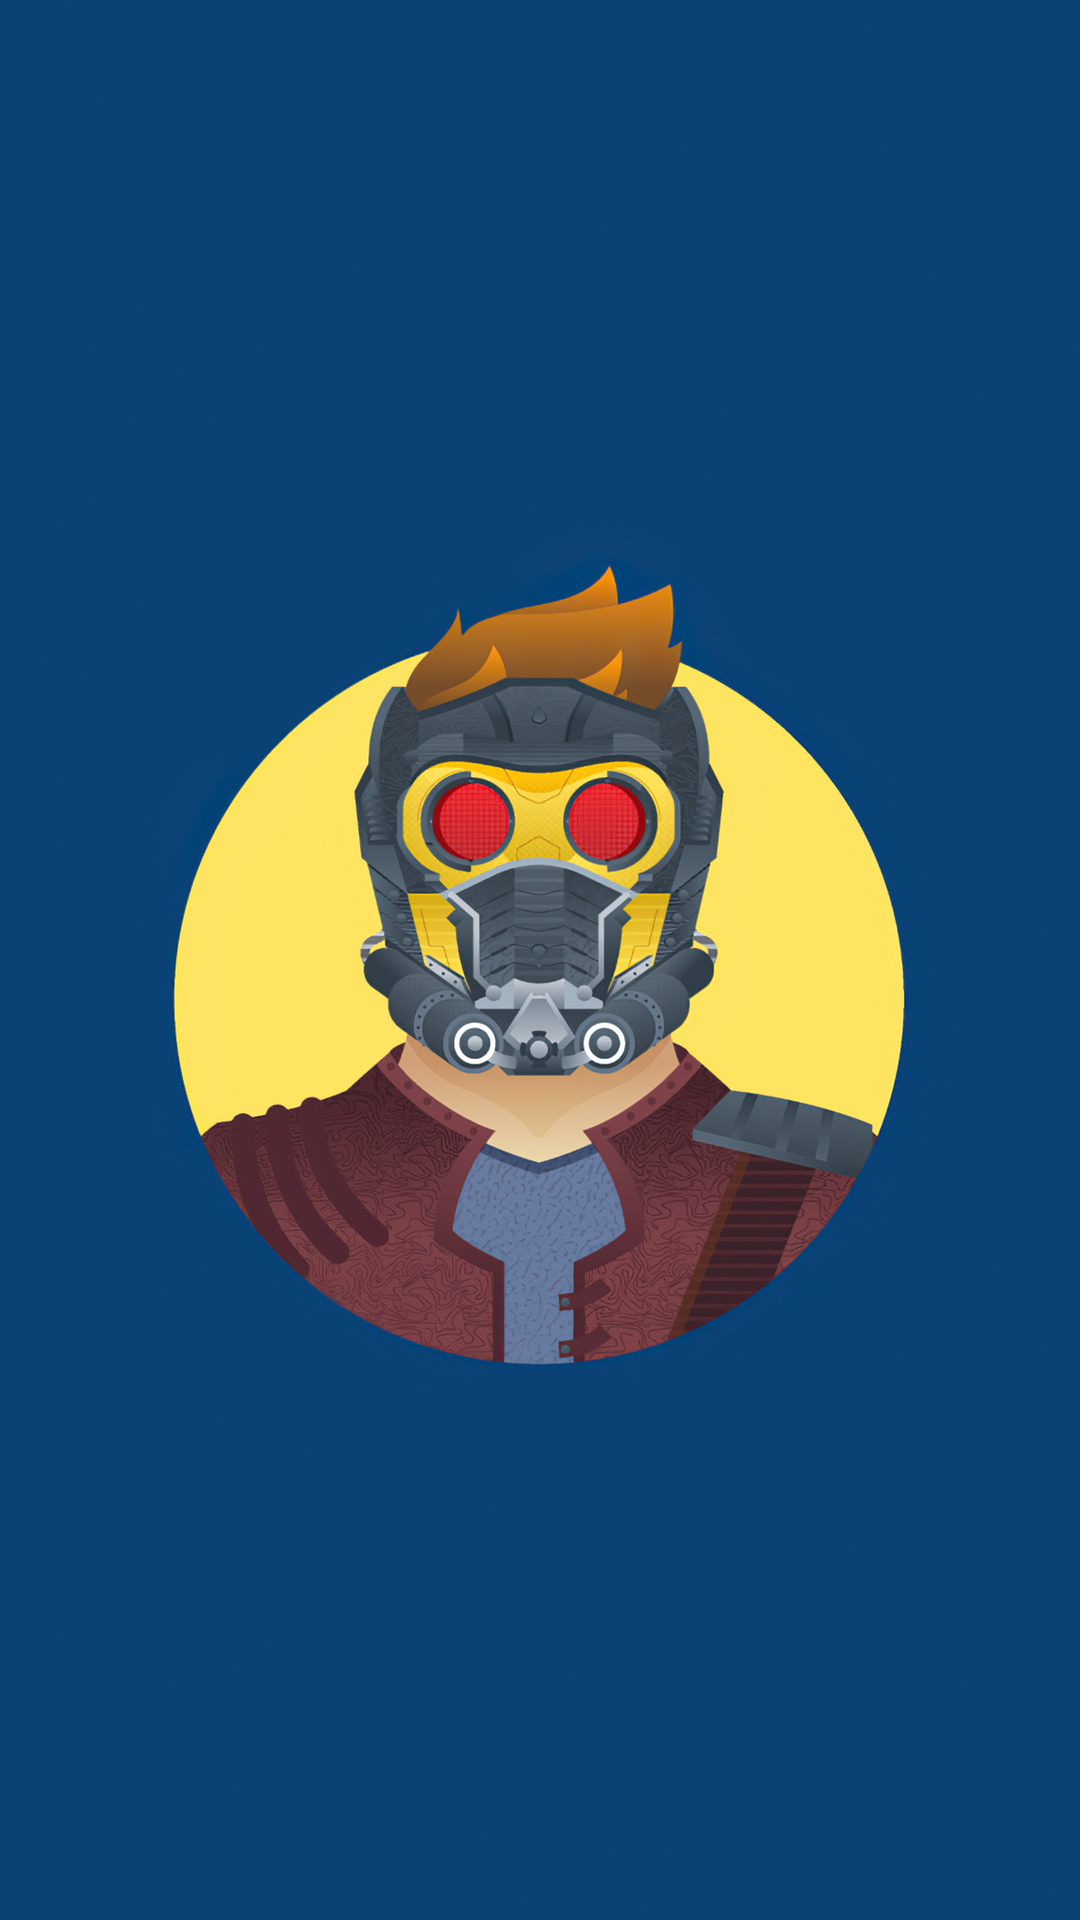 1080x1920 Star Lord 4k Minimalism Iphone 7,6s,6 Plus, Pixel xl ,One Plus  3,3t,5 HD 4k Wallpapers, Images, Backgrounds, Photos and Pictures